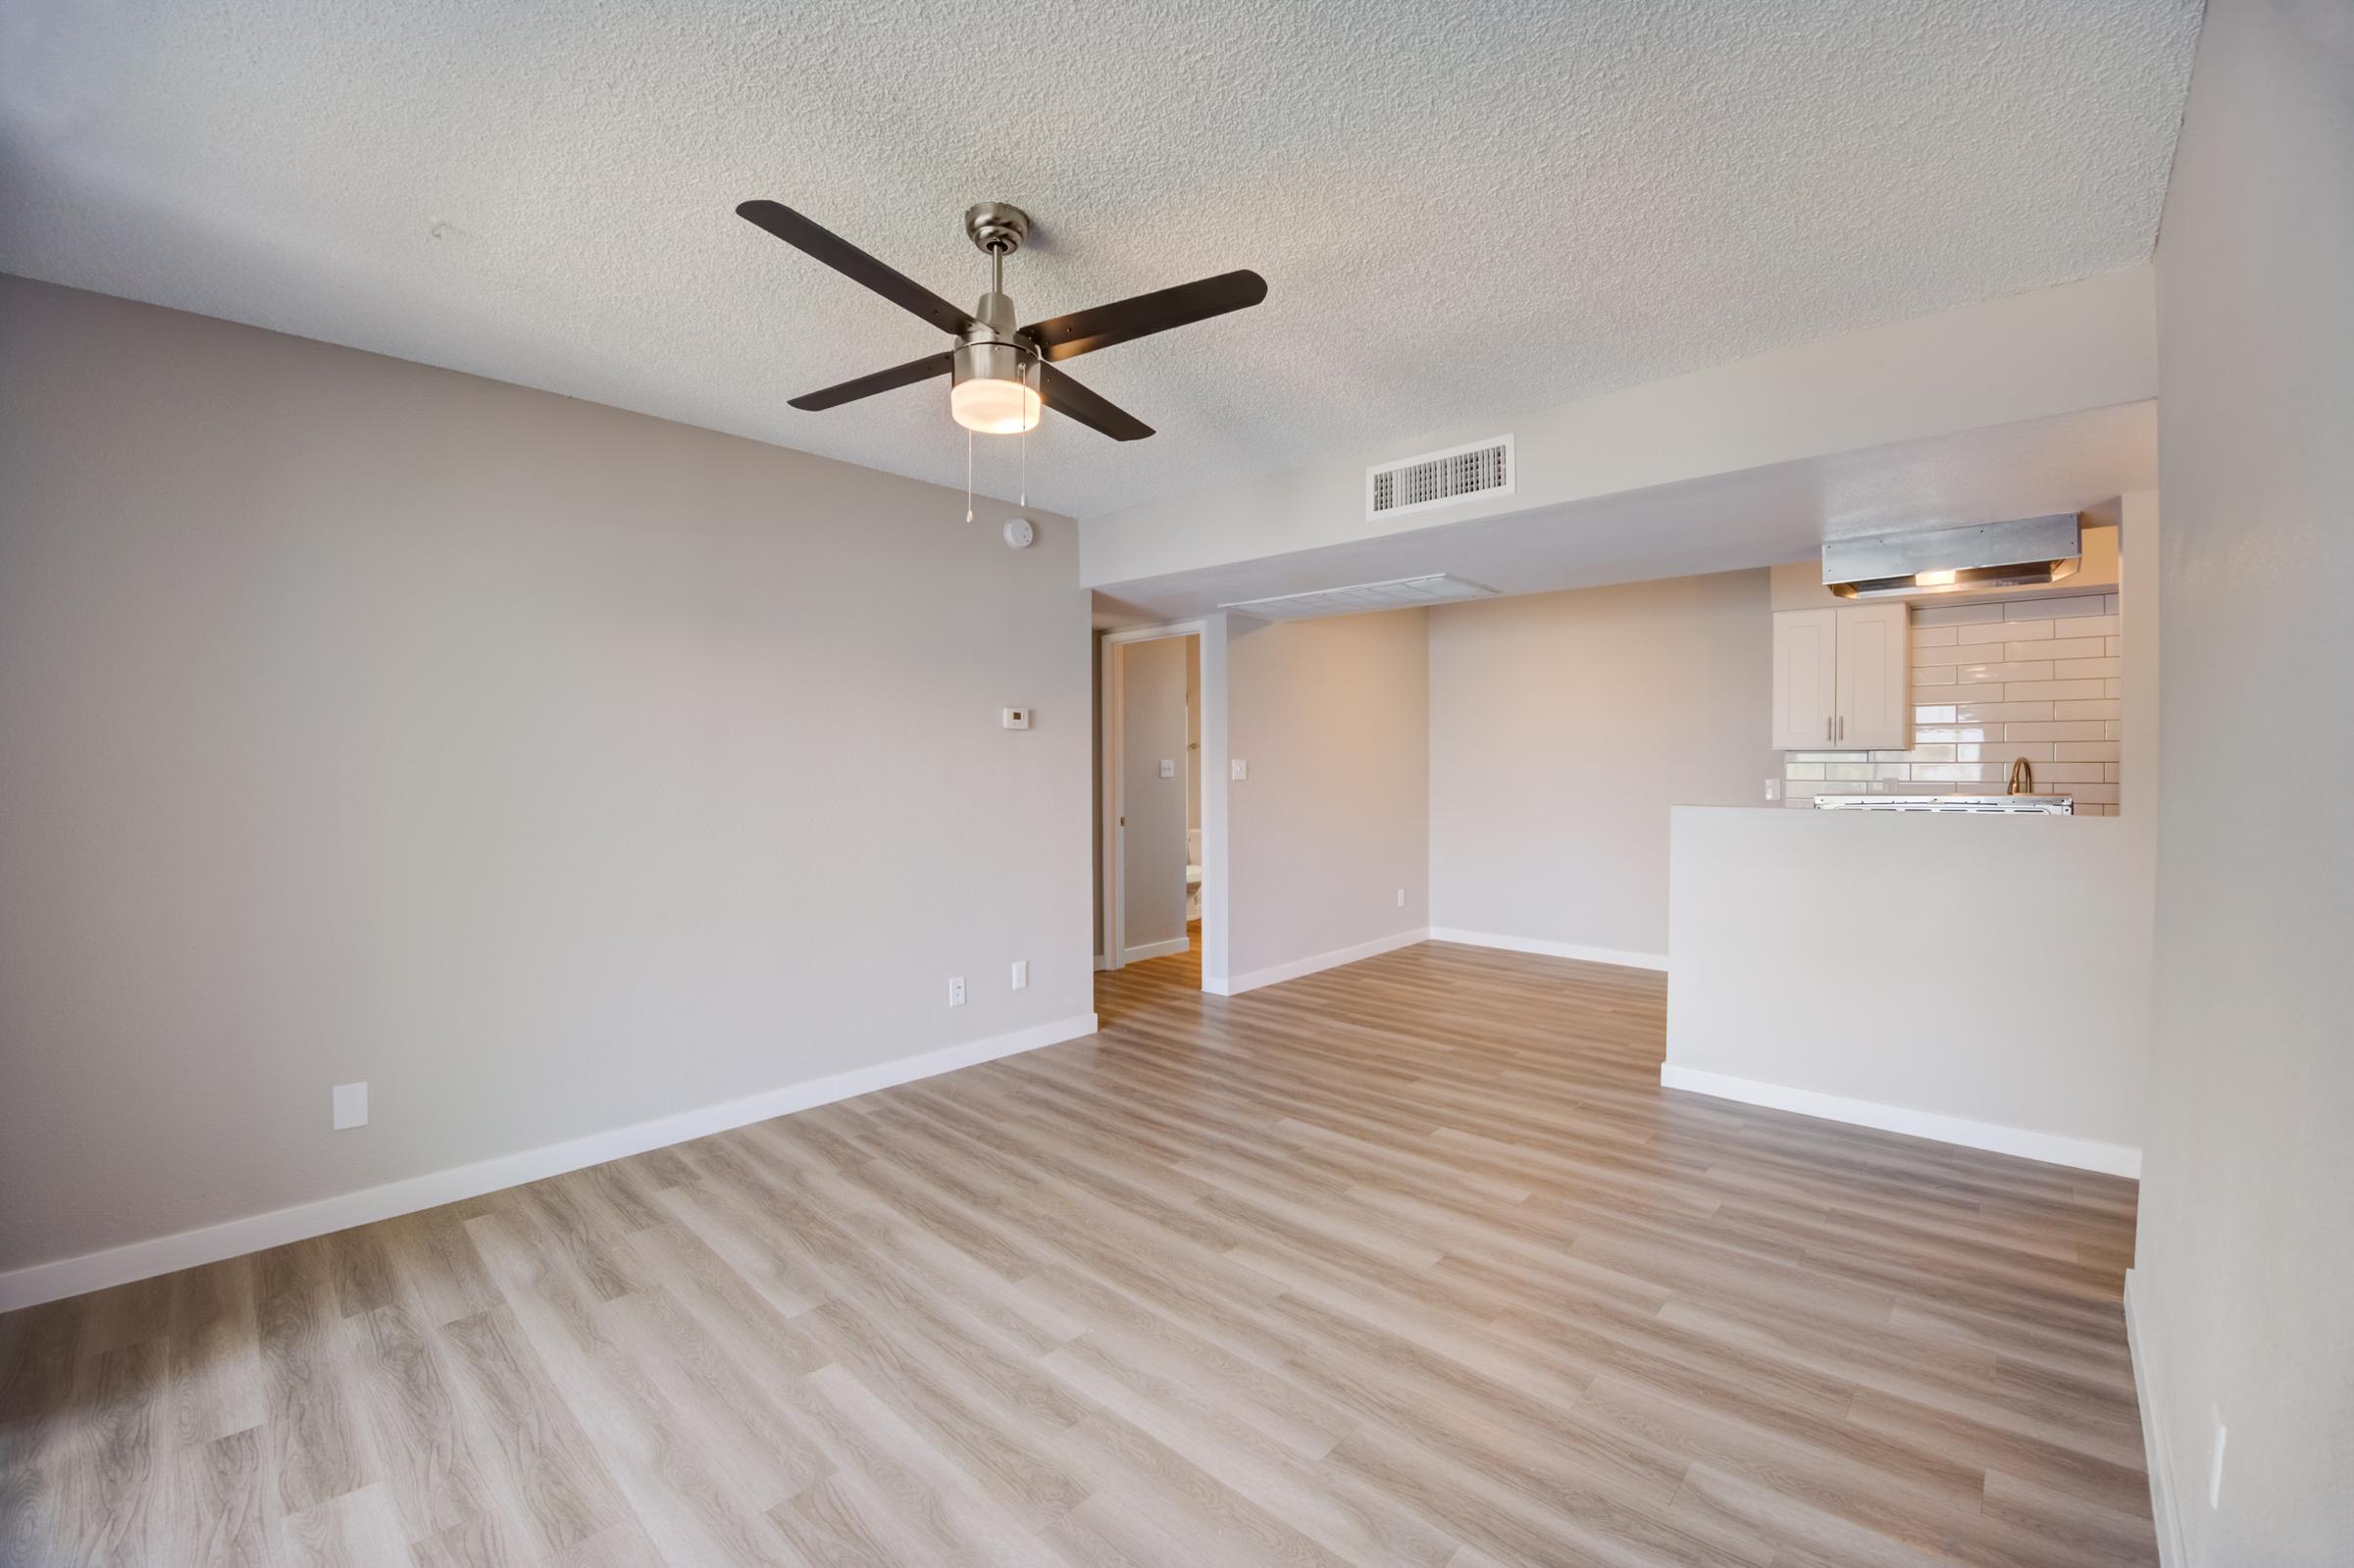 An apartment living room with a ceiling fan, dining area and kitchen at Rise at the Meadows.